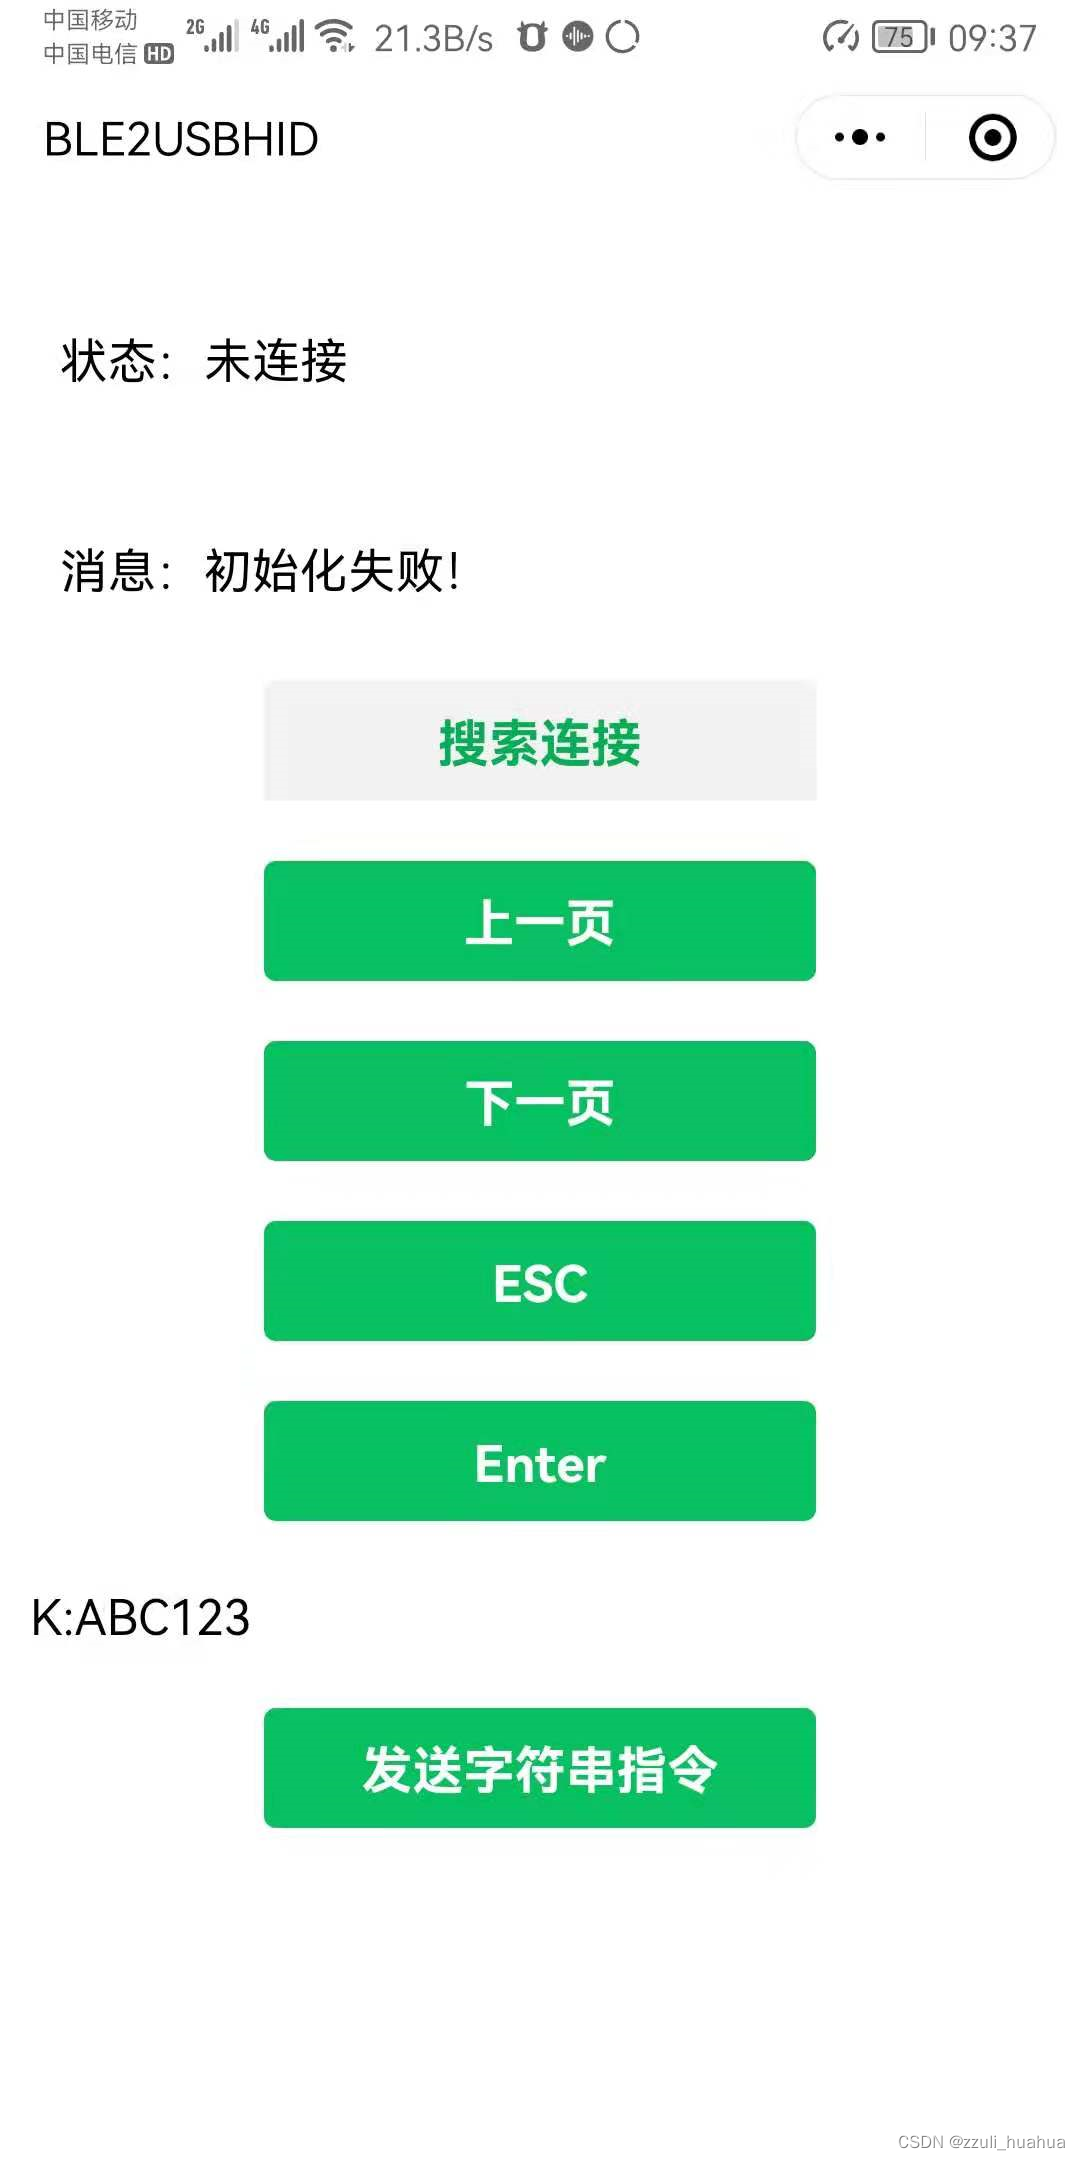 [External link picture transfer failed, the source site may have an anti-theft link mechanism, it is recommended to save the picture and upload it directly (img-rTPtrmQA-1667635378333)(https://note.youdao.com/yws/public/resource/d662c9c1c58121ec28901d78d9aa5e80/xmlnote /WEBRESOURCE8130d5ddf82bb098c6d182f999a39da0/9837)]